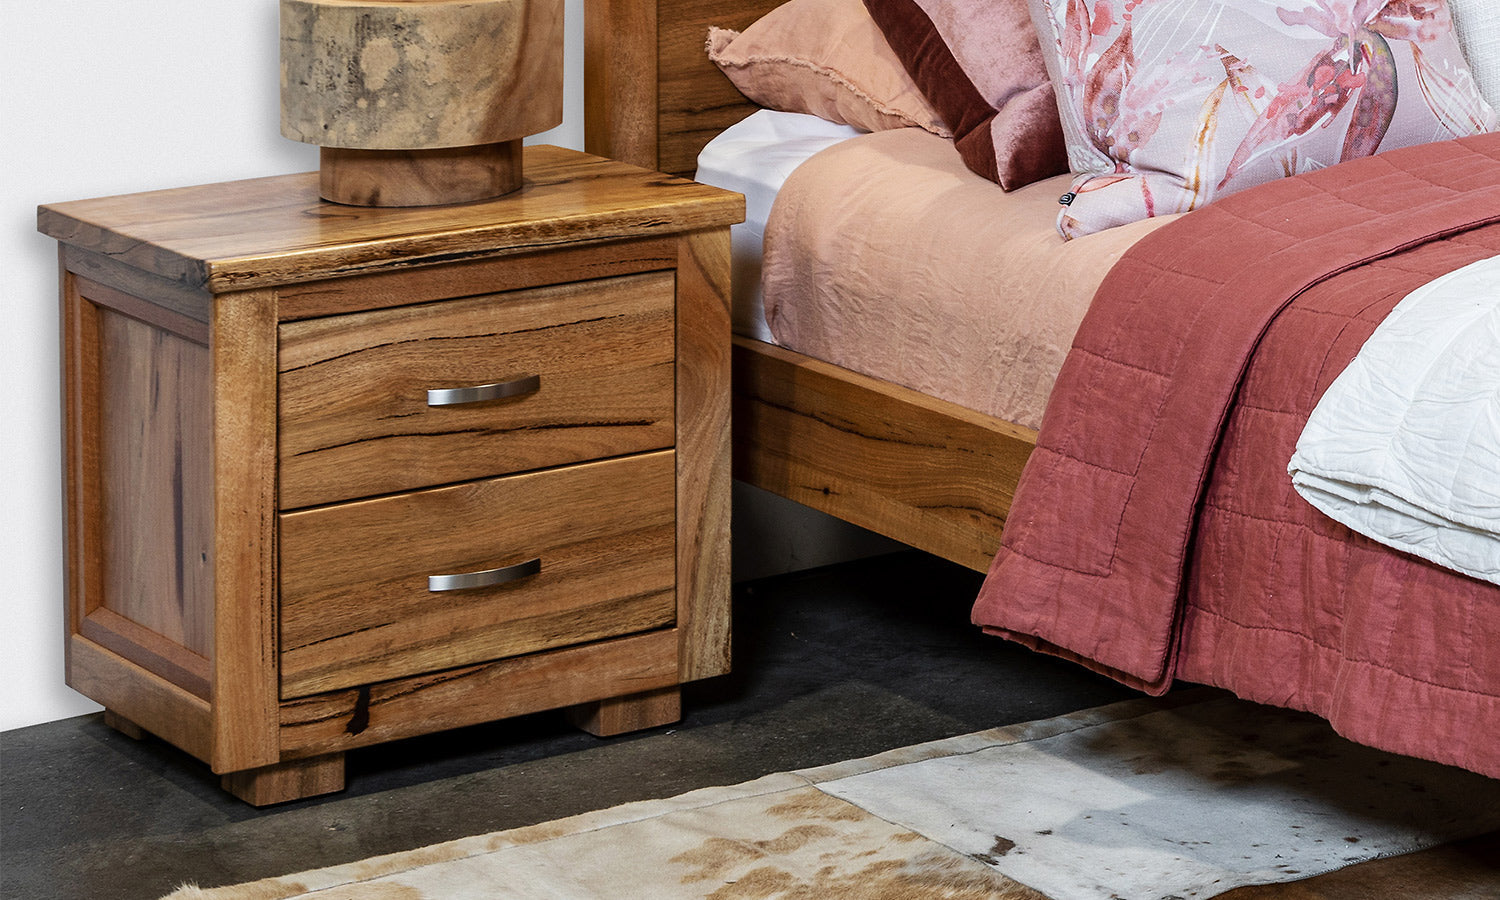 Leeuwin Solid Marri or Jarrah Timber Wood Bedside Tables with Single Drawer or Two Drawers, Made in Perth WA